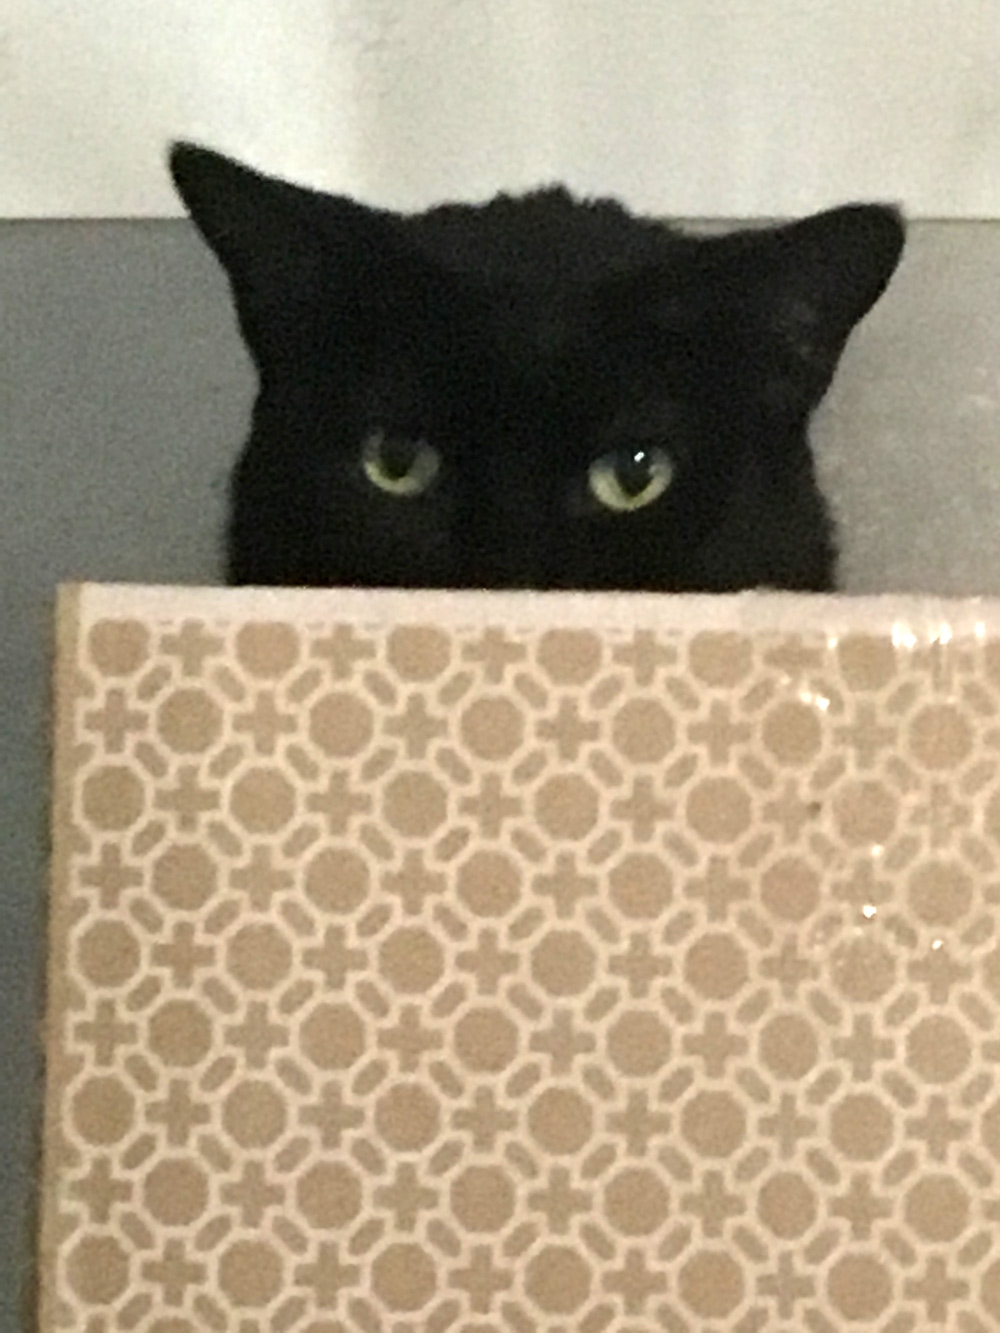 Here’s Buddy, hiding in his favorite box on top of the refrigerator. Sandy D. sent in his picture.